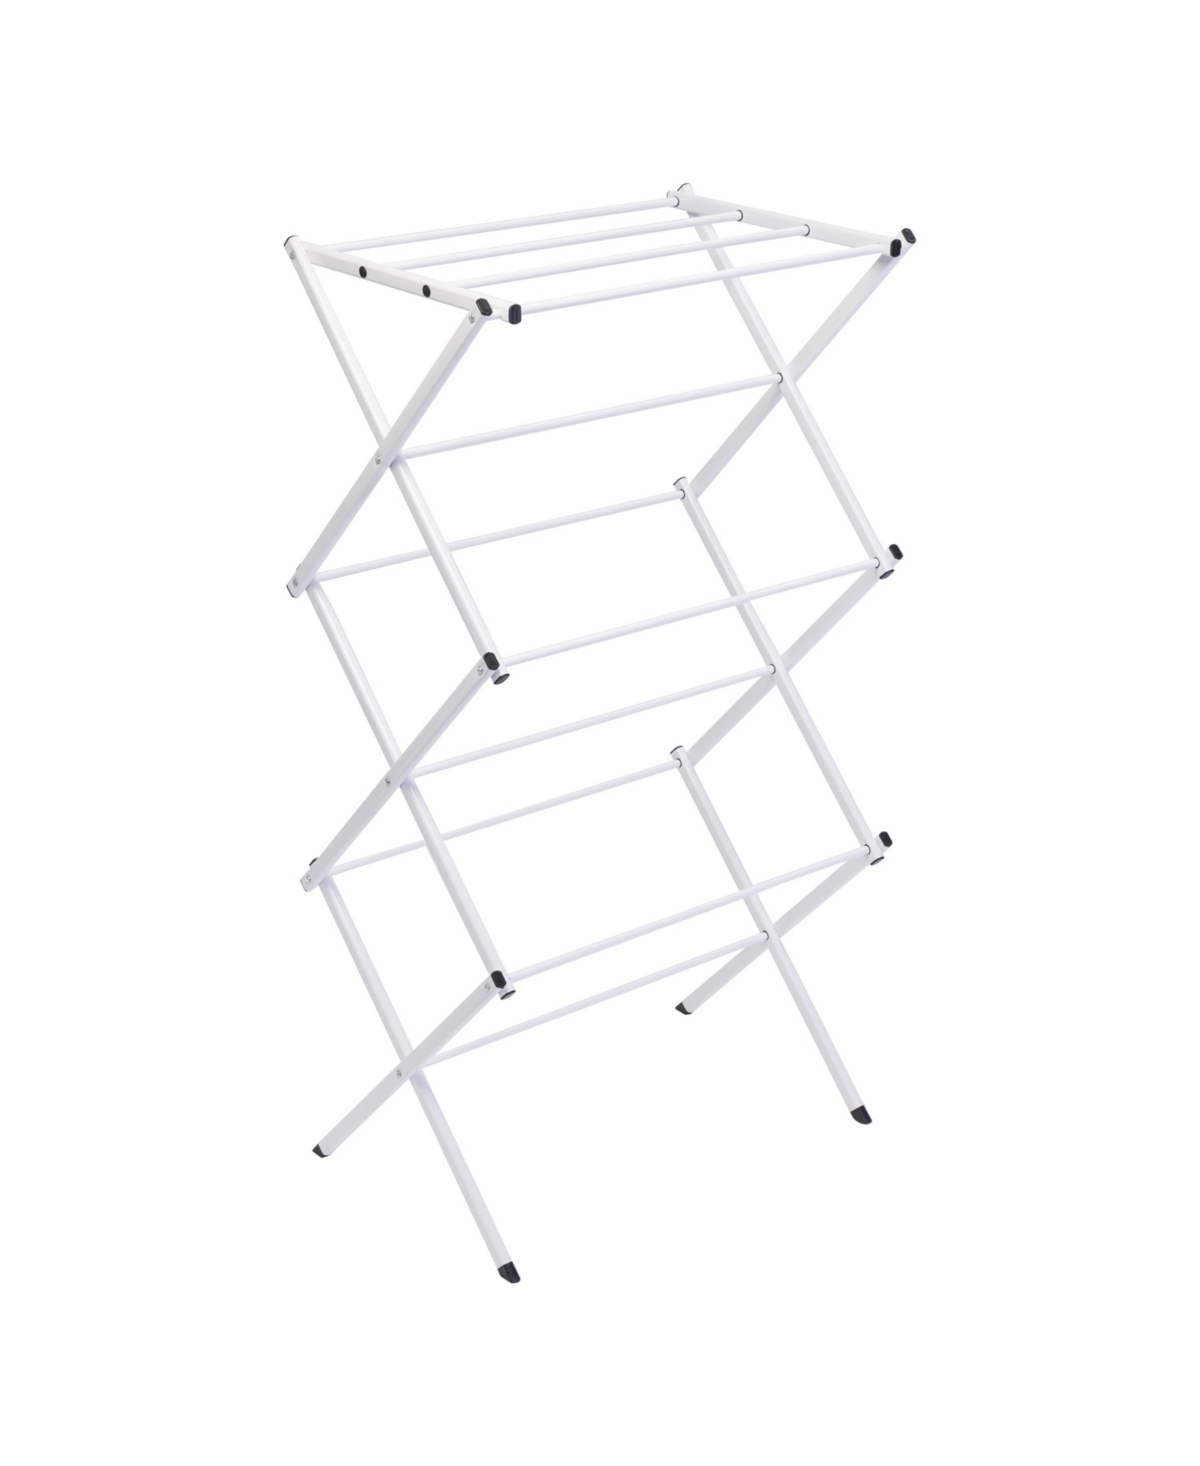 Compact Folding Metal Clothes Drying Rack - White